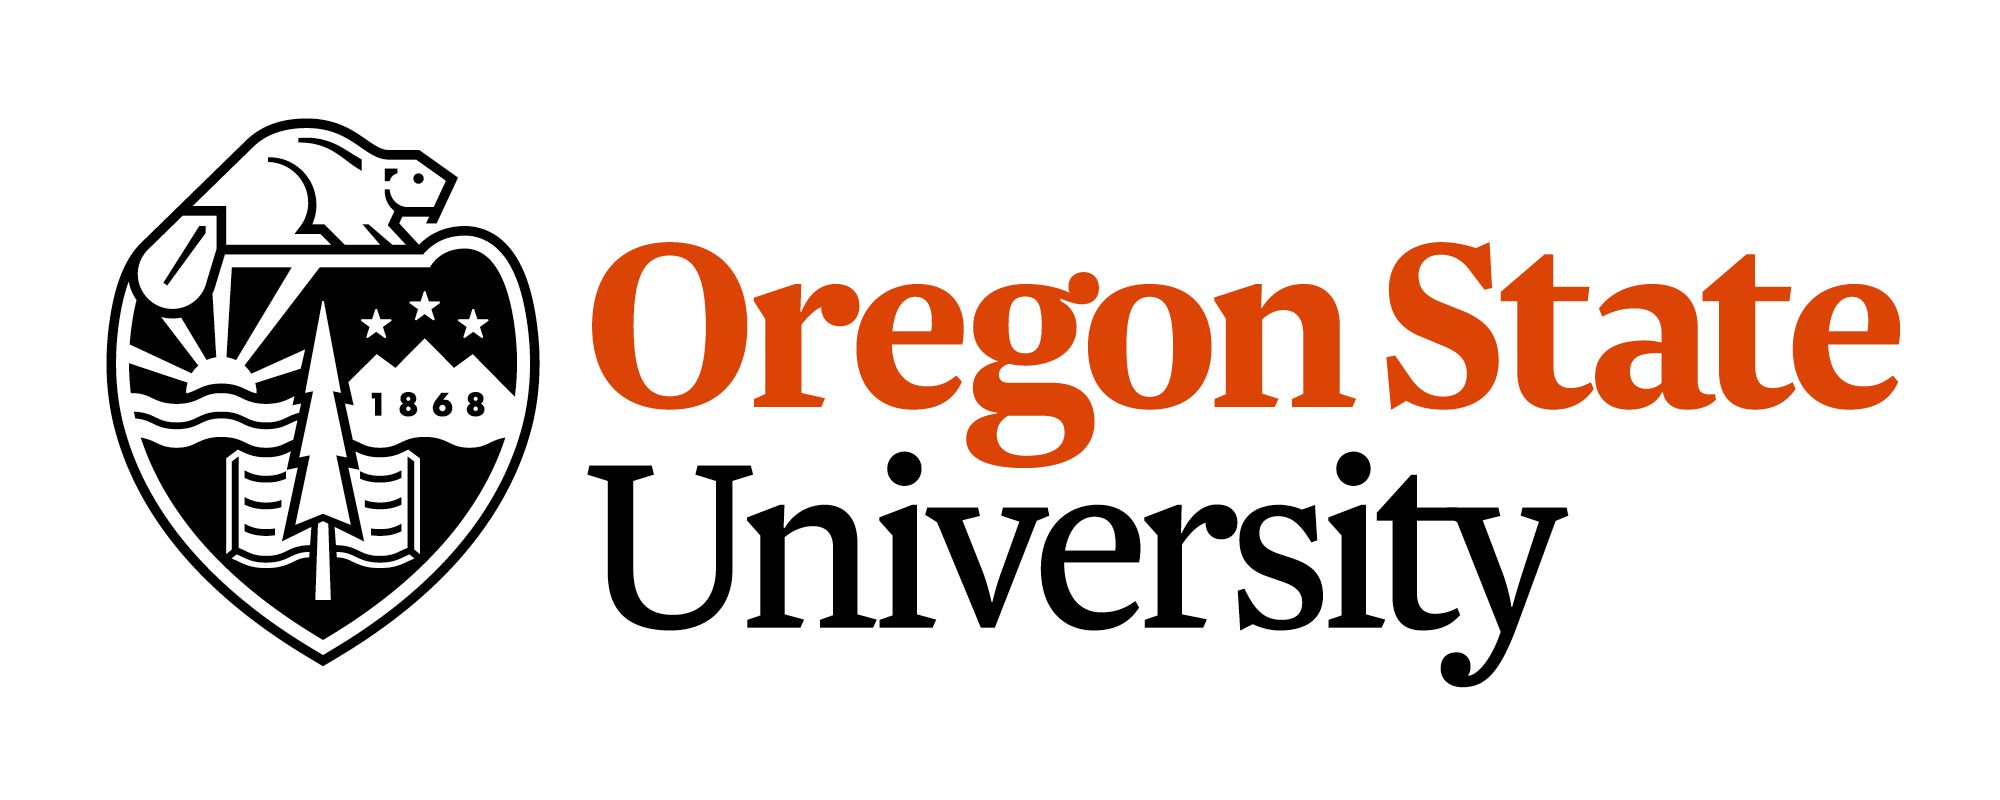 You are currently viewing Oregon State University: Oregon State researchers discover compounds contributing to smoke taint in wine and grapes